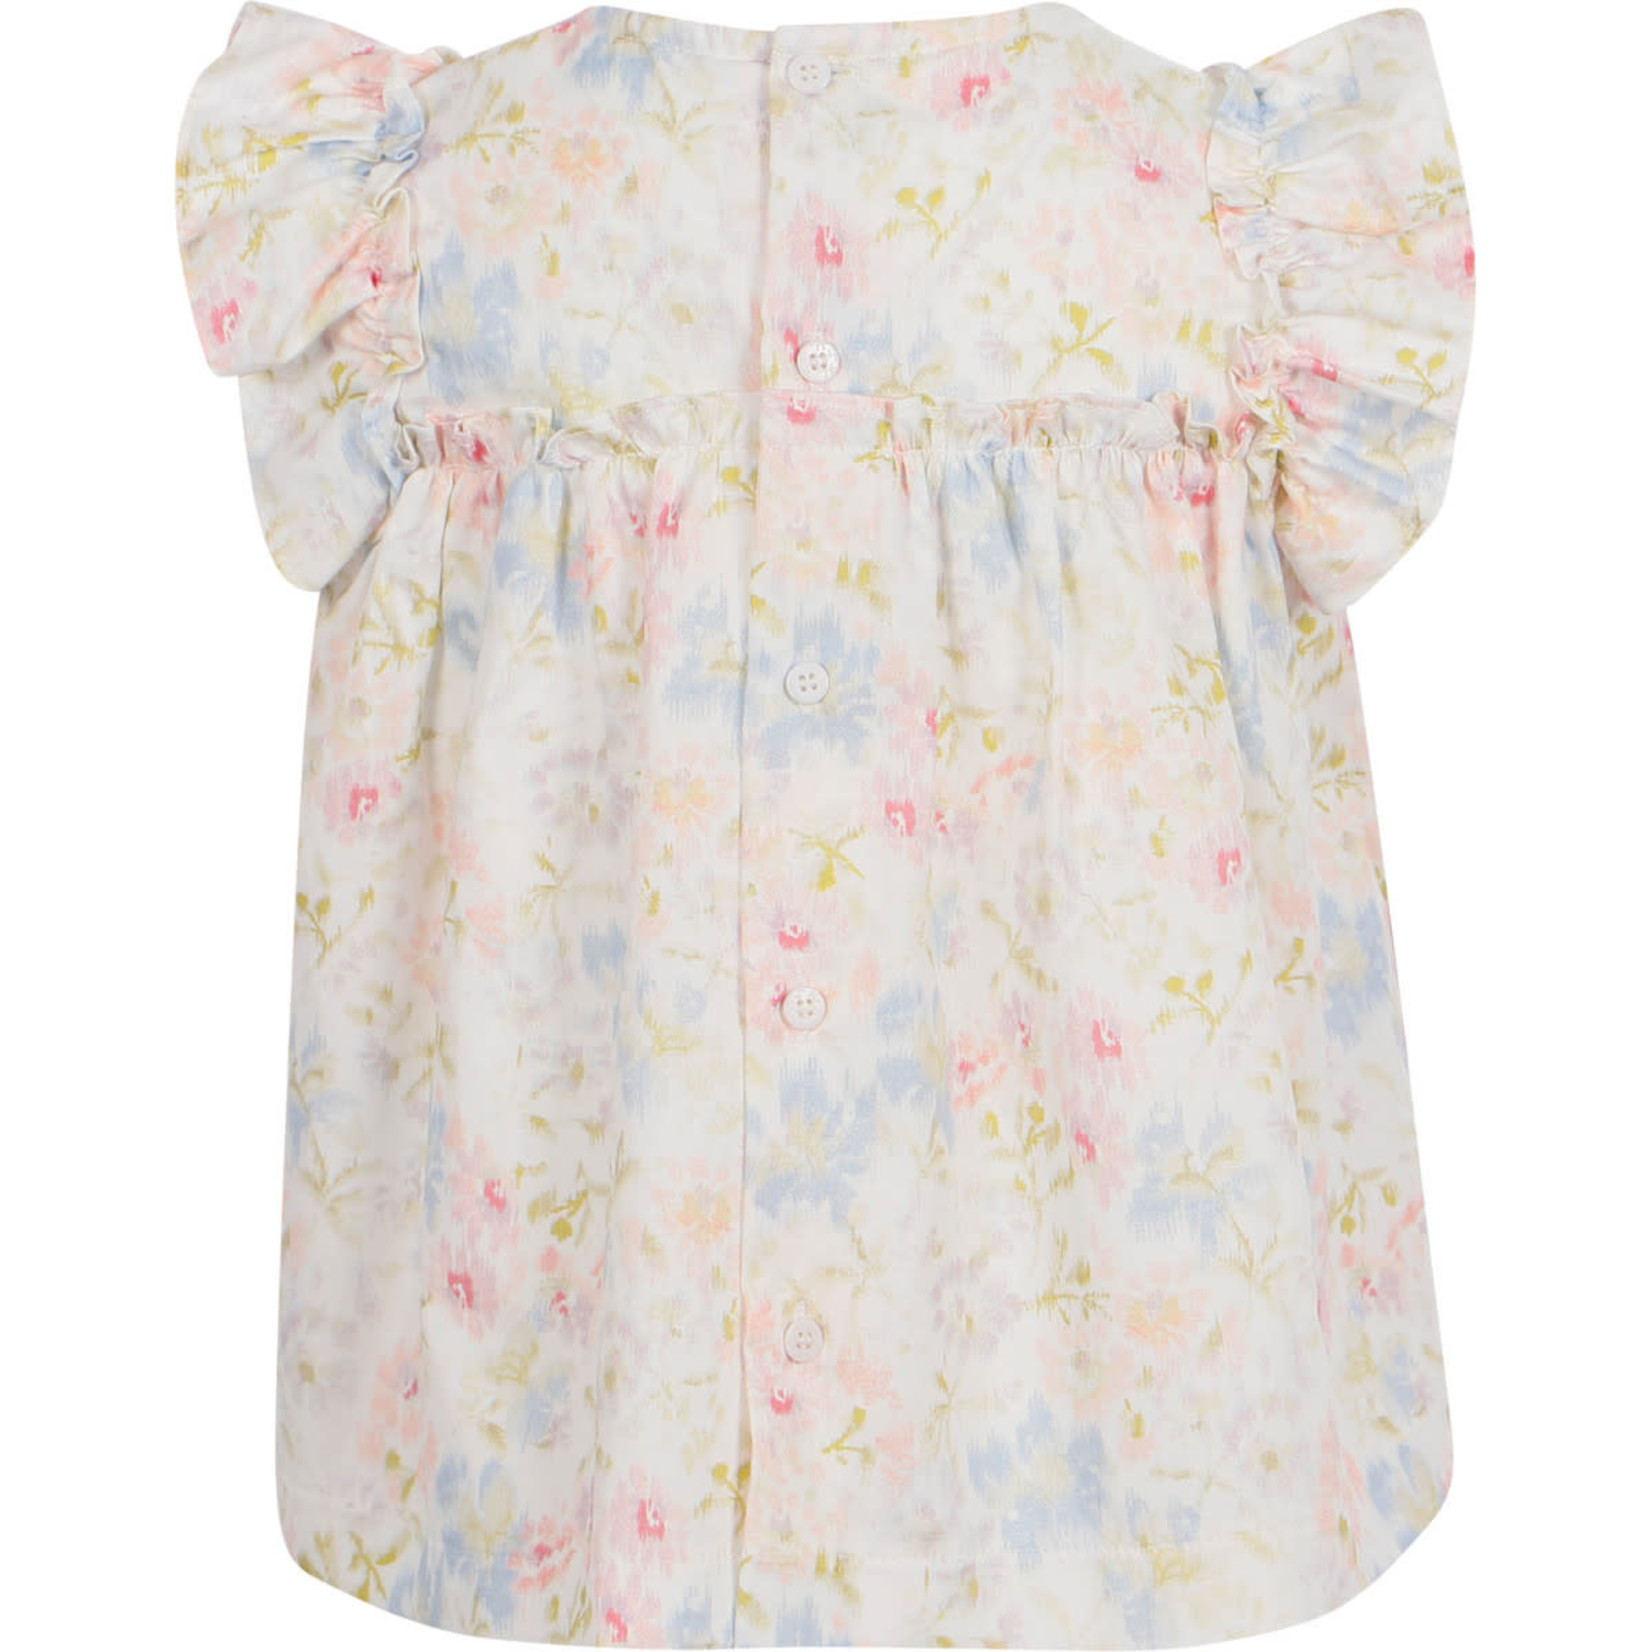 Il Gufo Il Gufo-ss21 Floral Dress Blouse and Shorts Set in White and Pink